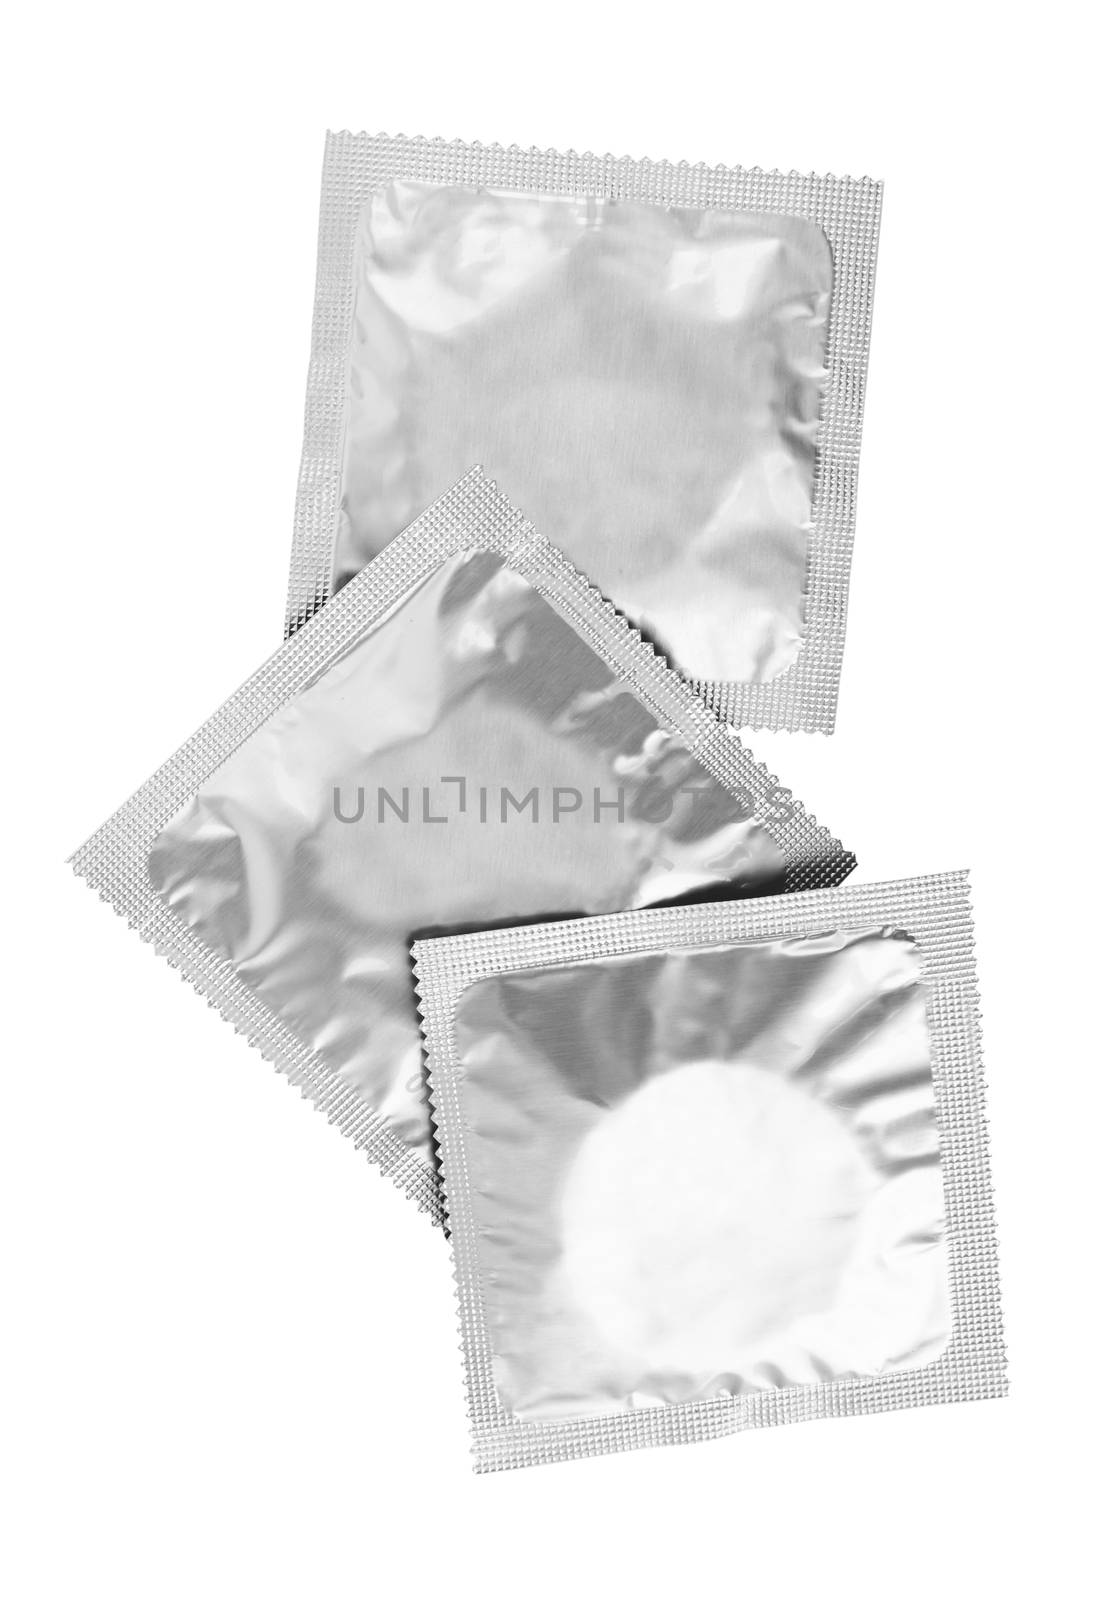 Condoms on white by pioneer111